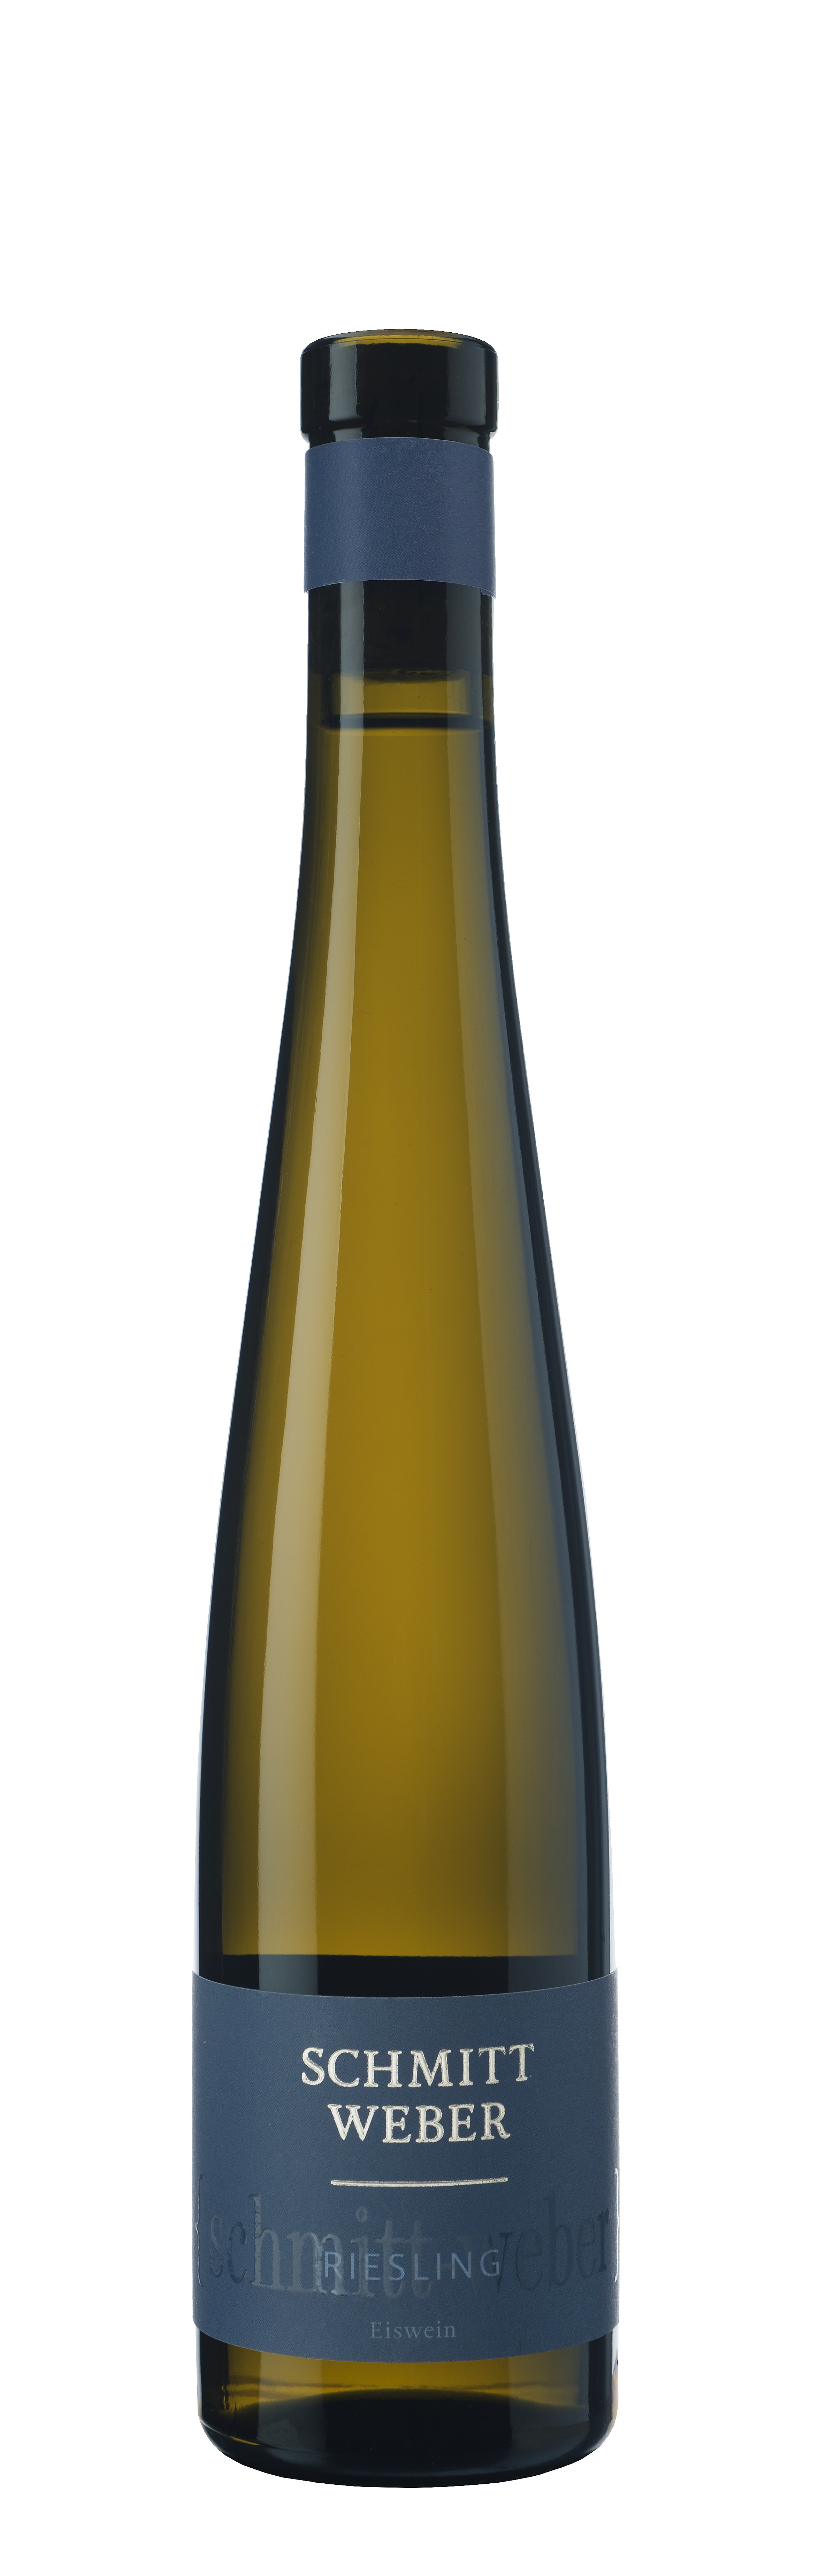 2016 Riesling Eiswein (0,375 l)